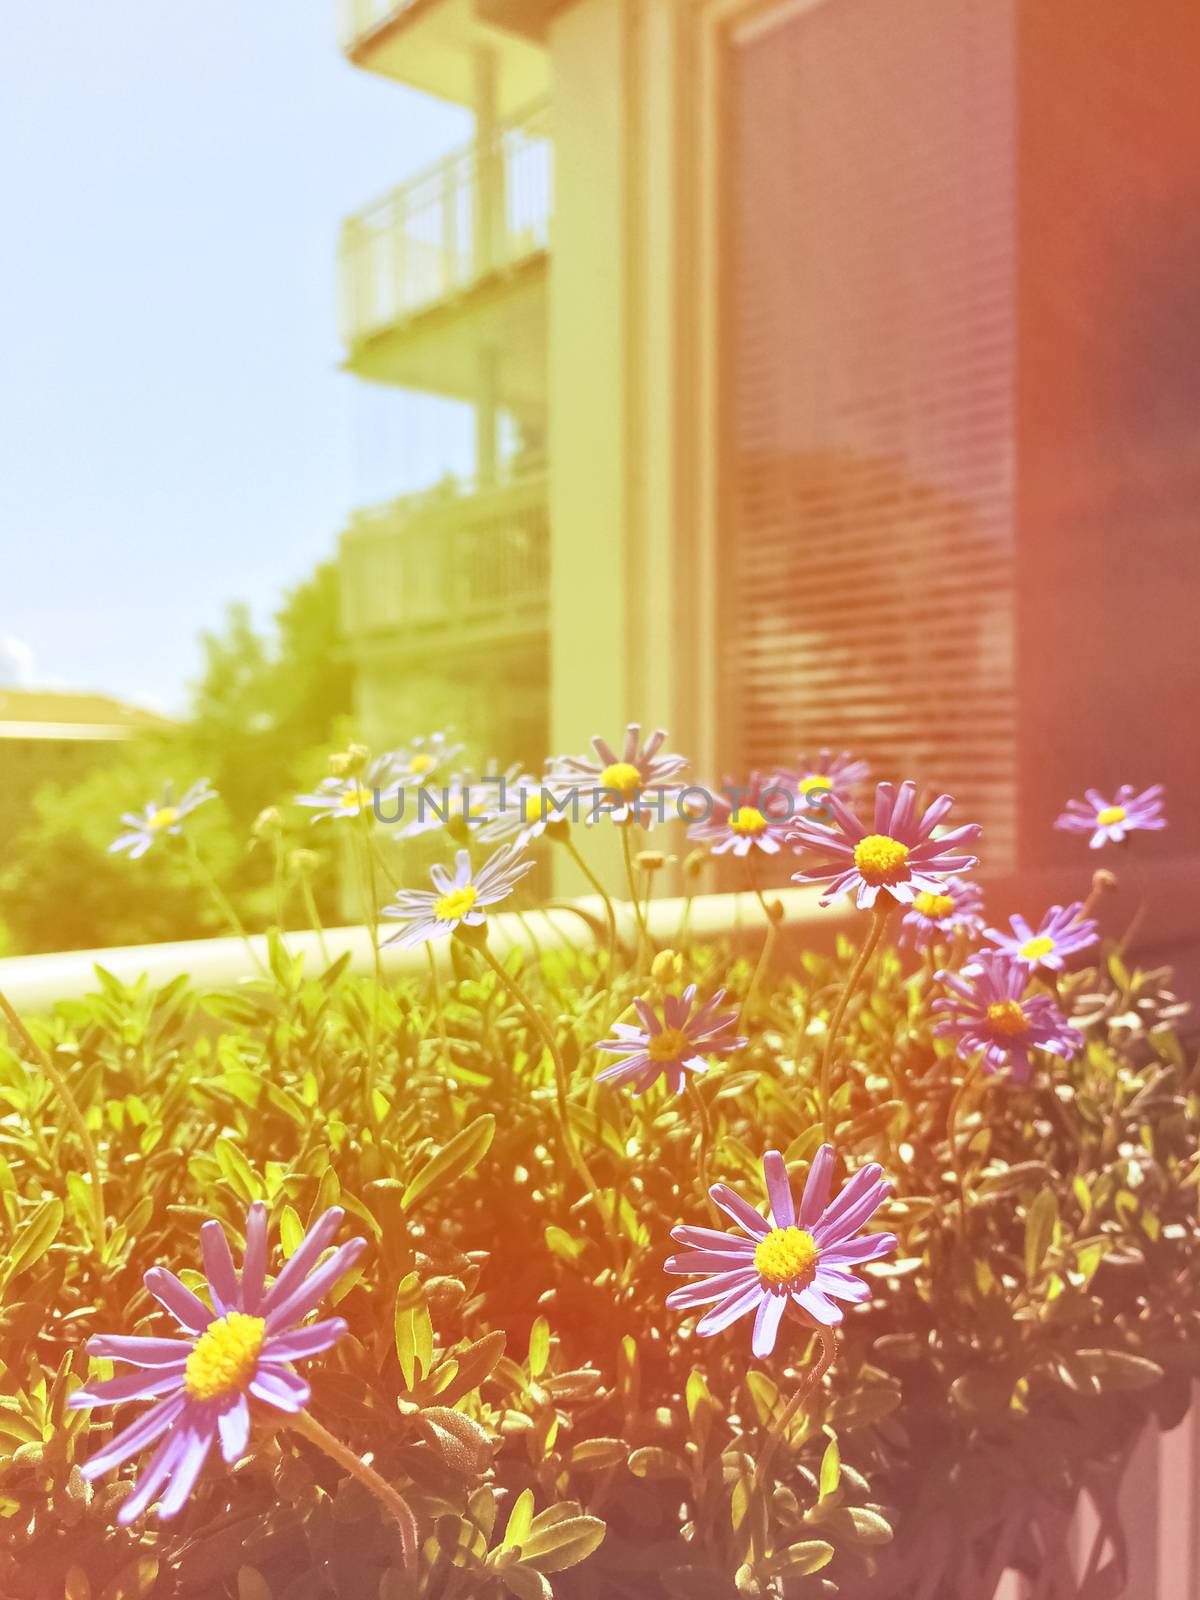 Balcony with blooming daisies. Retro style photo with light leaks.